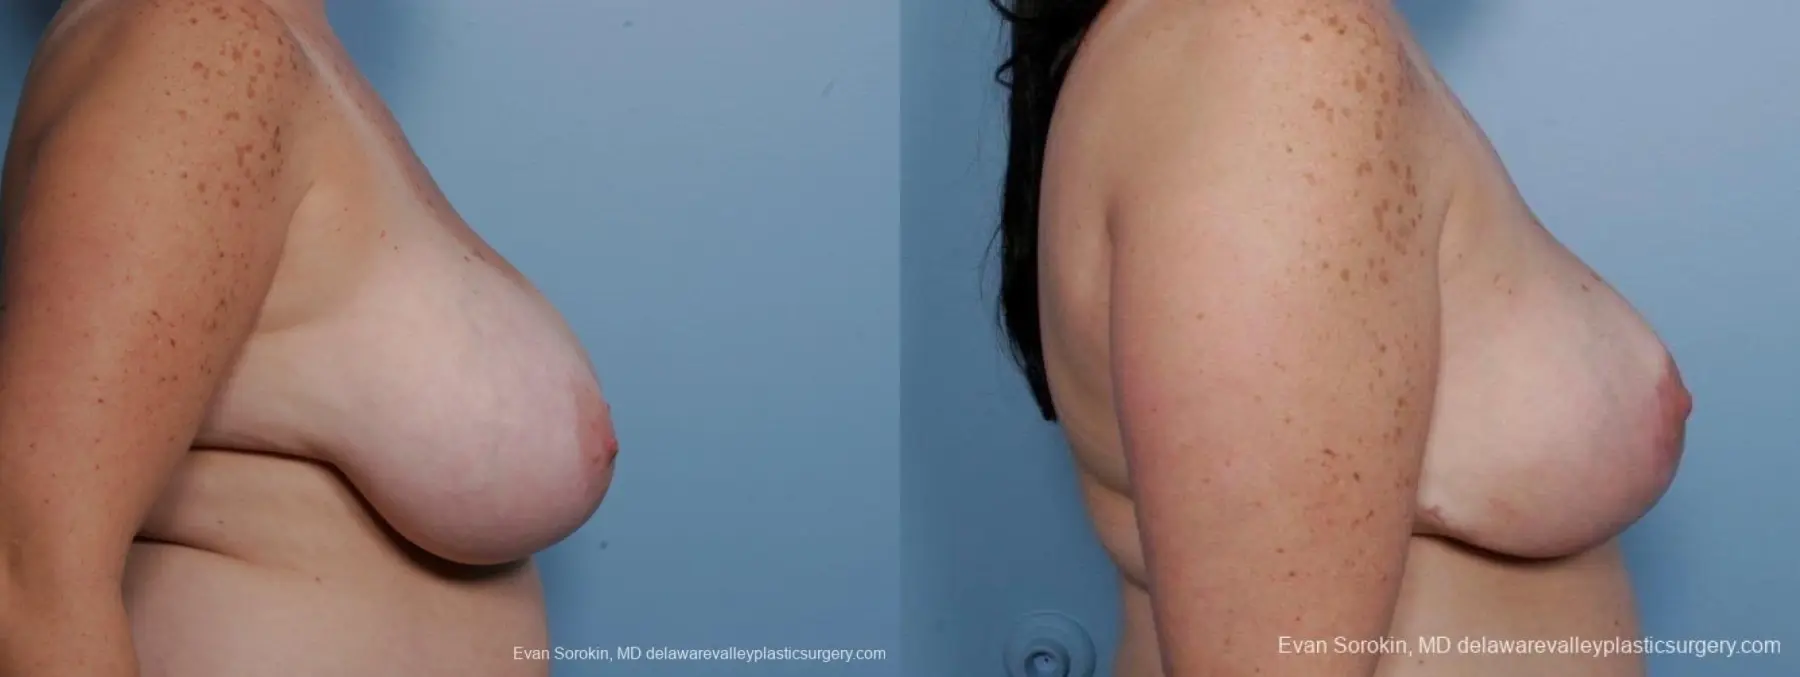 Philadelphia Breast Reduction 8703 - Before and After 5